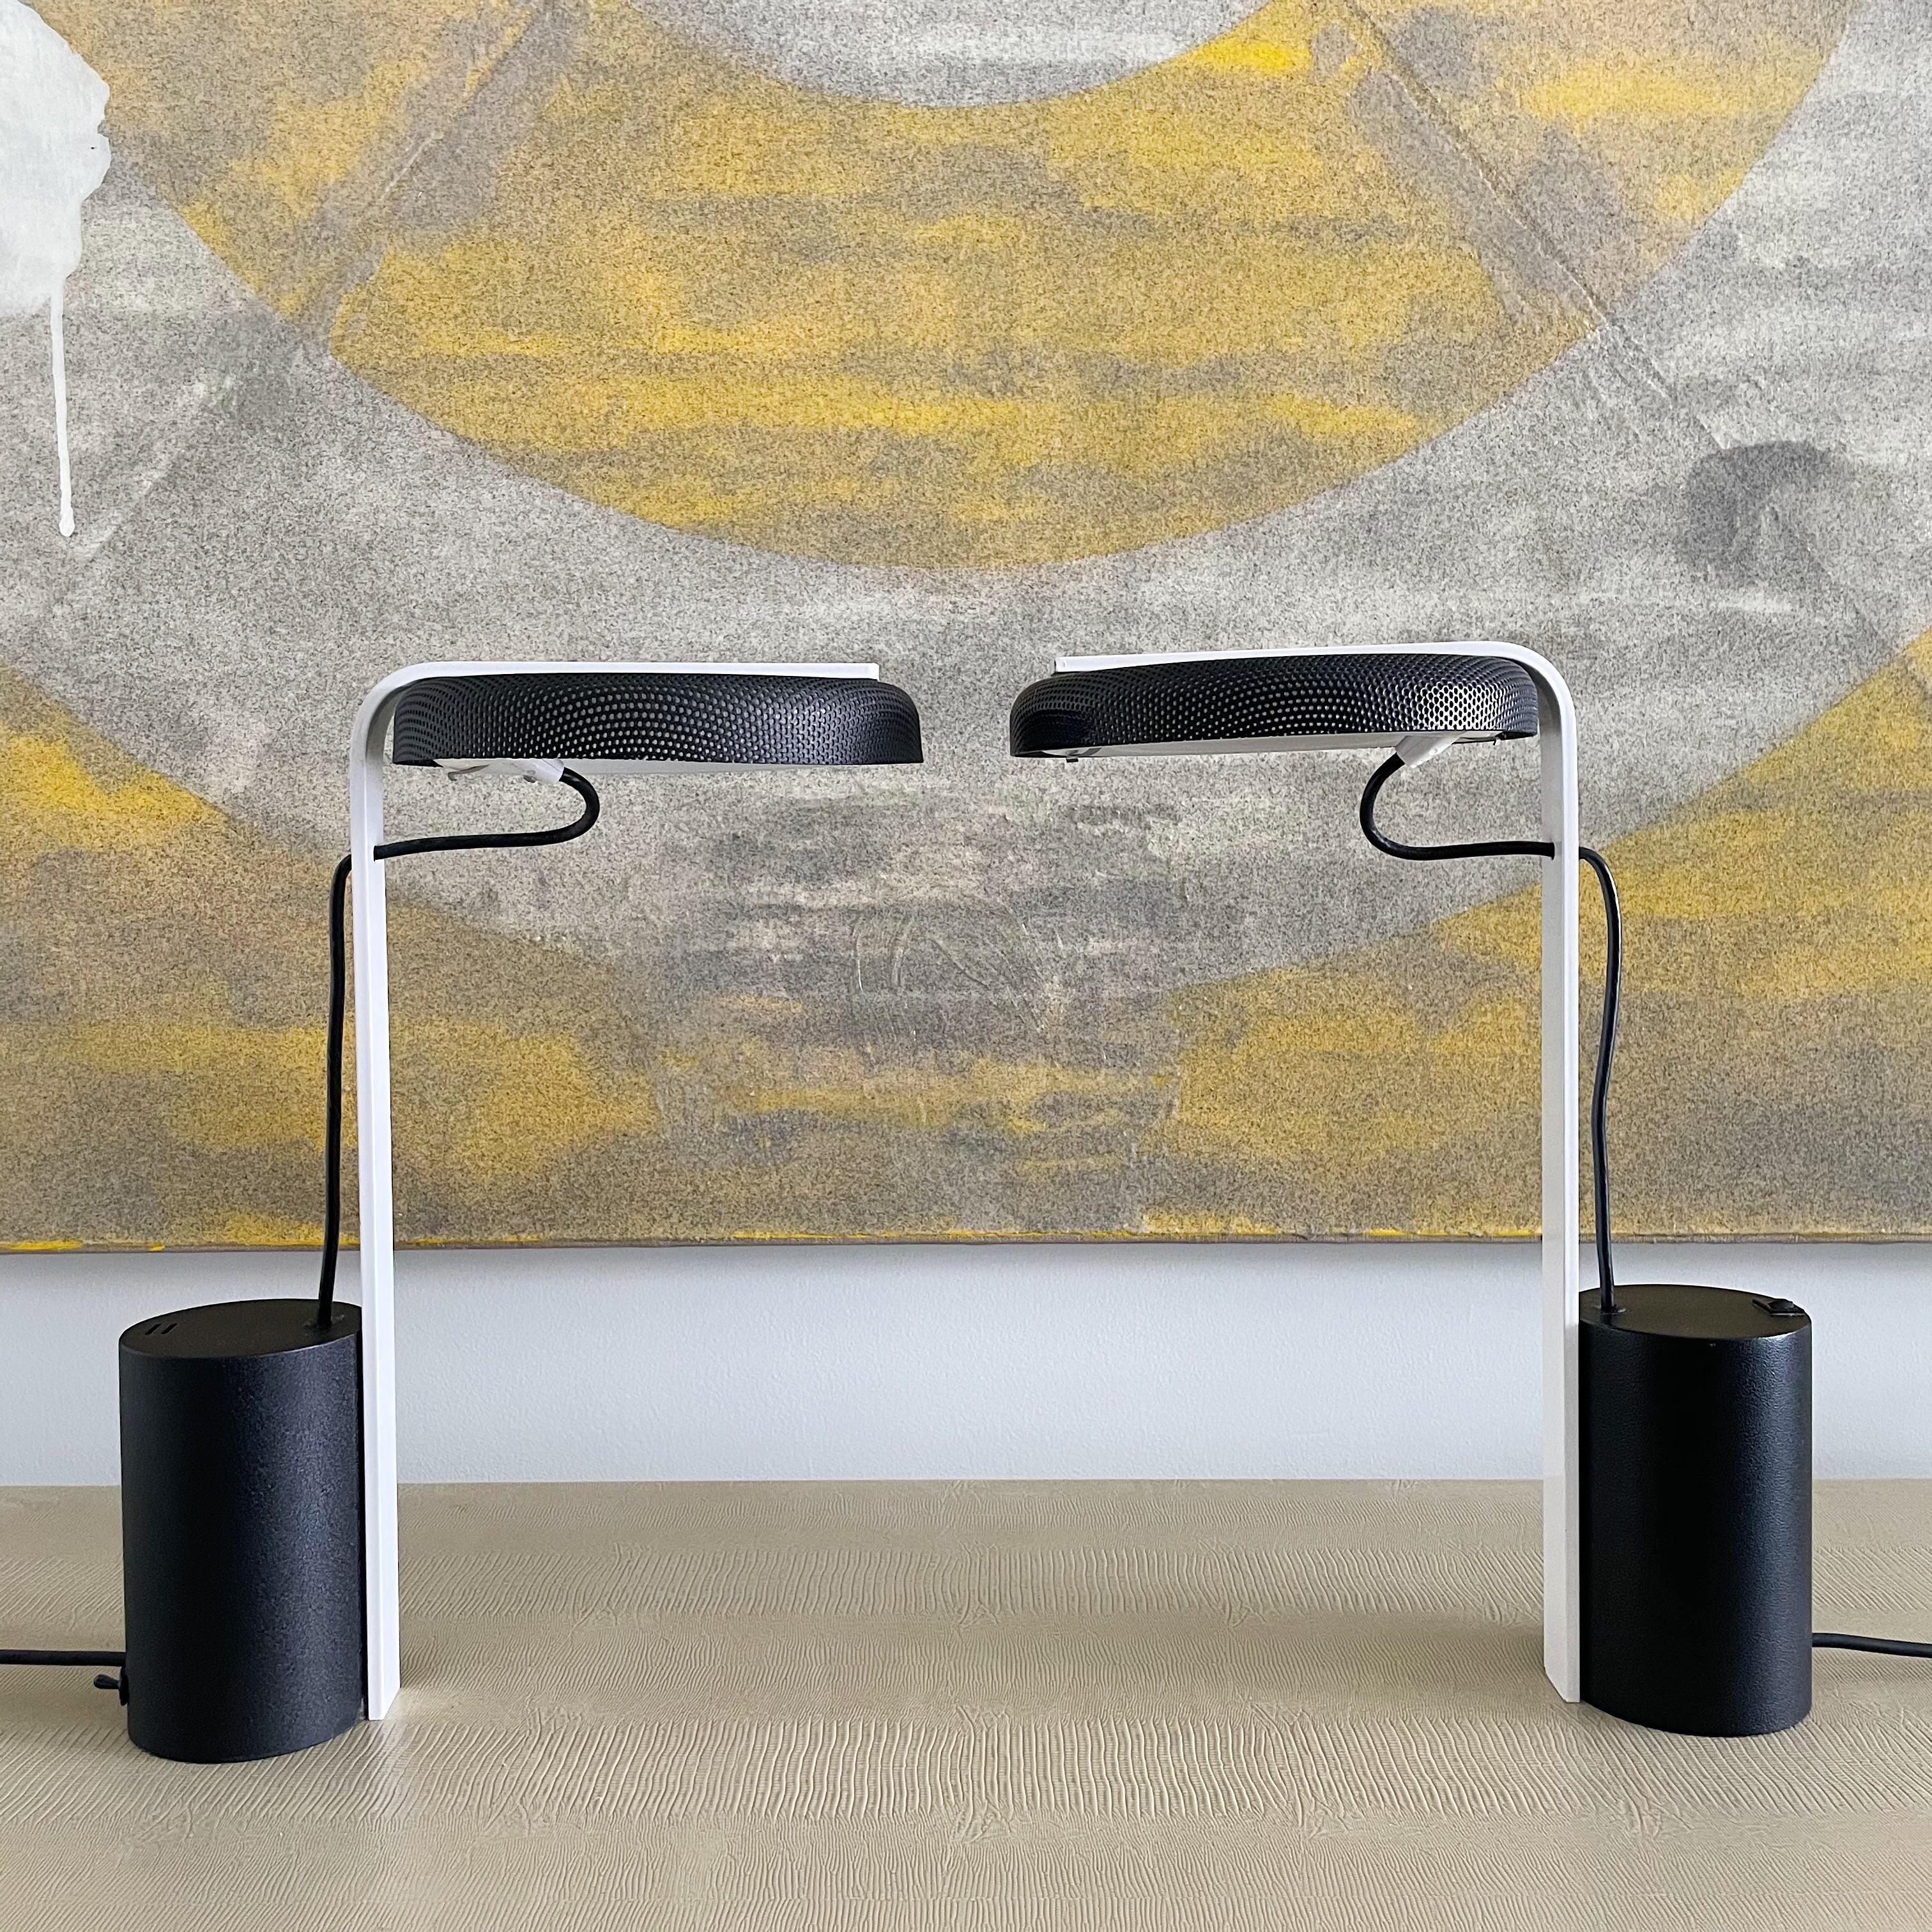 2 / 2

Offered for sale is a pair of sleek post-modern desk lamps designed by Ron Rezek. These lamps feature a counterbalance design and come with a round perforated shade in black enameled metal, a white stem, and a black cylindrical base. They